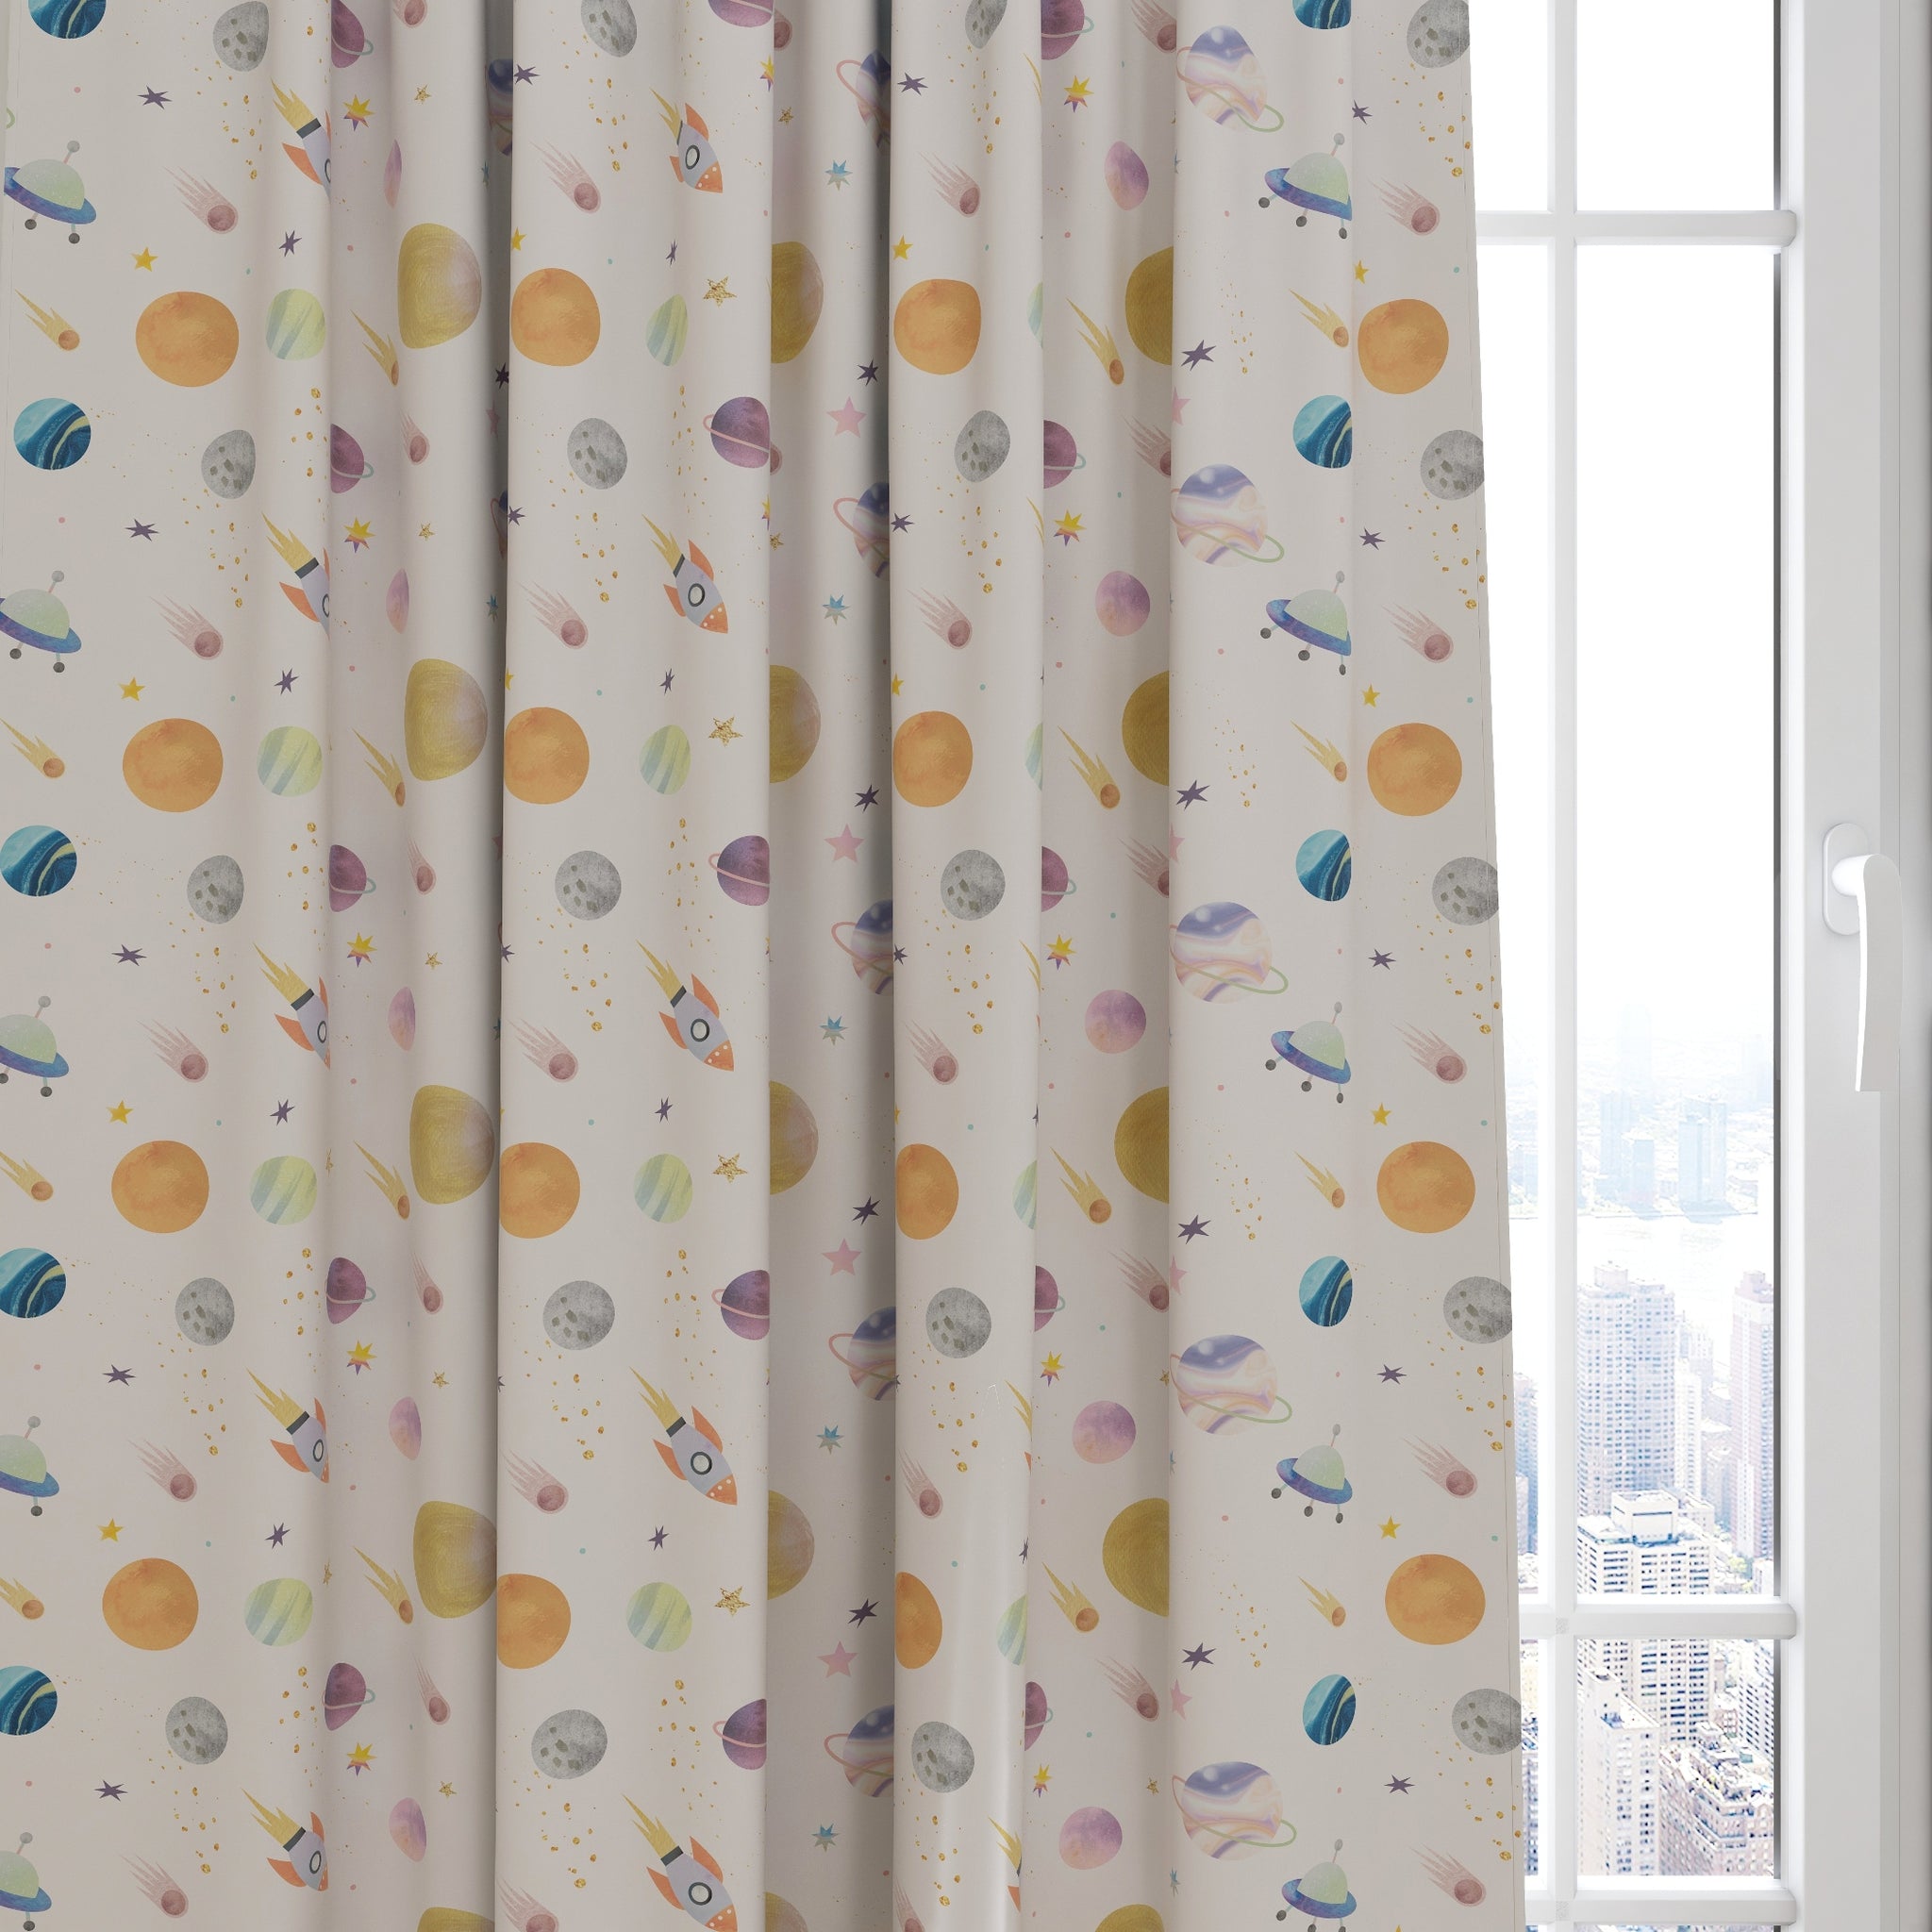 Space Kids & Nursery Blackout Curtains - Marbled Planets